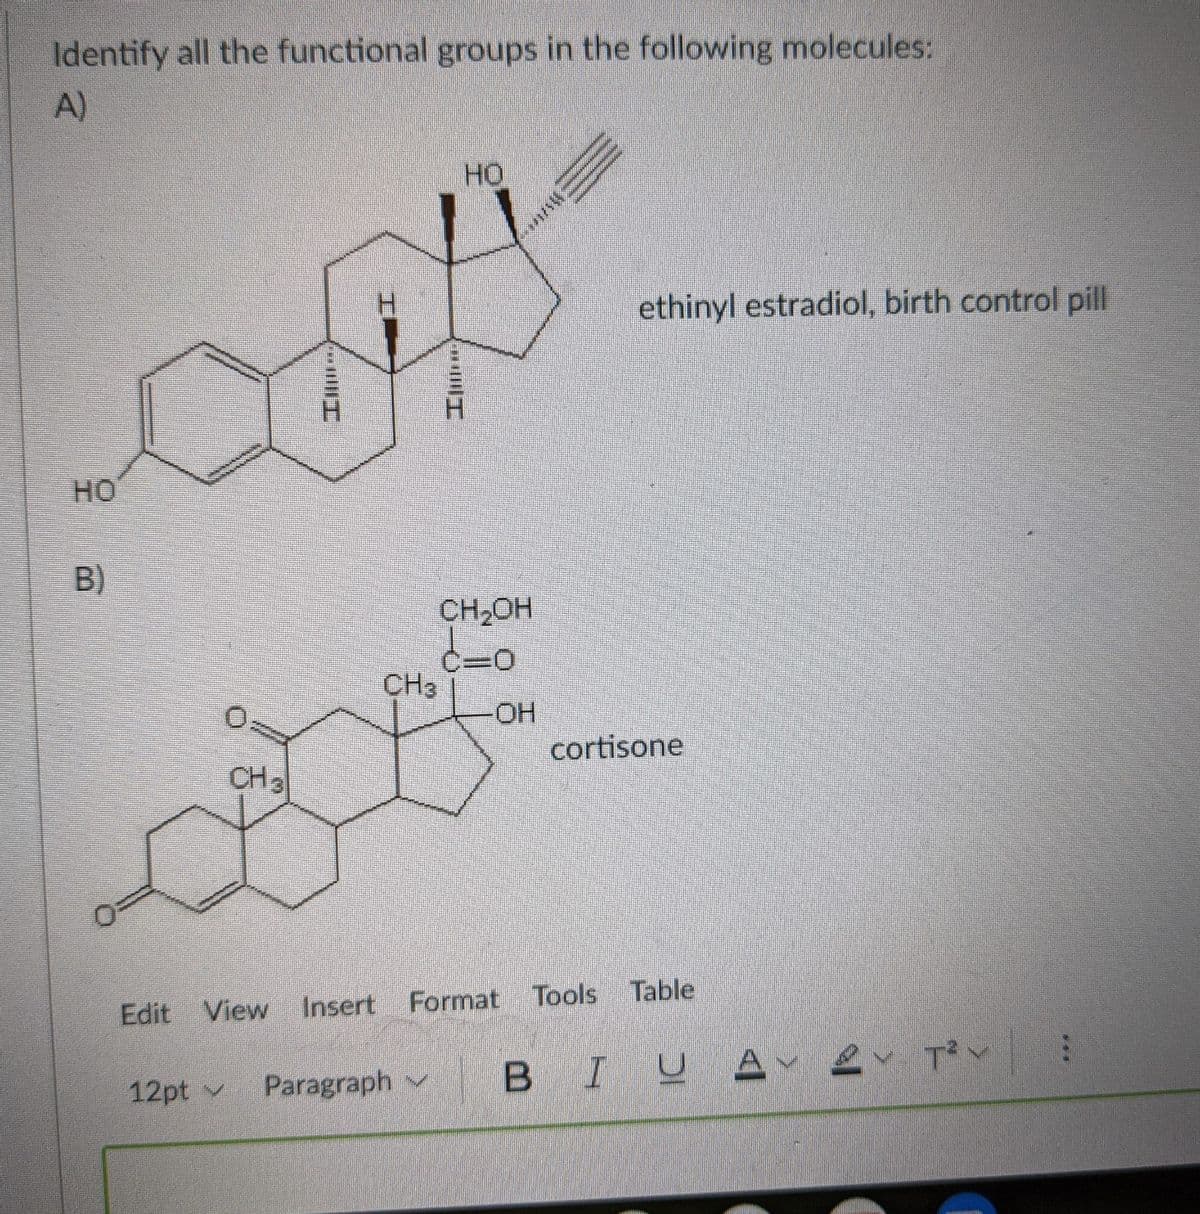 Identify all the functional groups in the following molecules:
A)
HO
ethinyl estradiol, birth control pill
HO
B)
CH2OH
C30
CH3
HO-
cortisone
CH3
Table
Edit View
Insert Format Tools
Paragraph v
BIUA 2 Tv
12pt v
I
